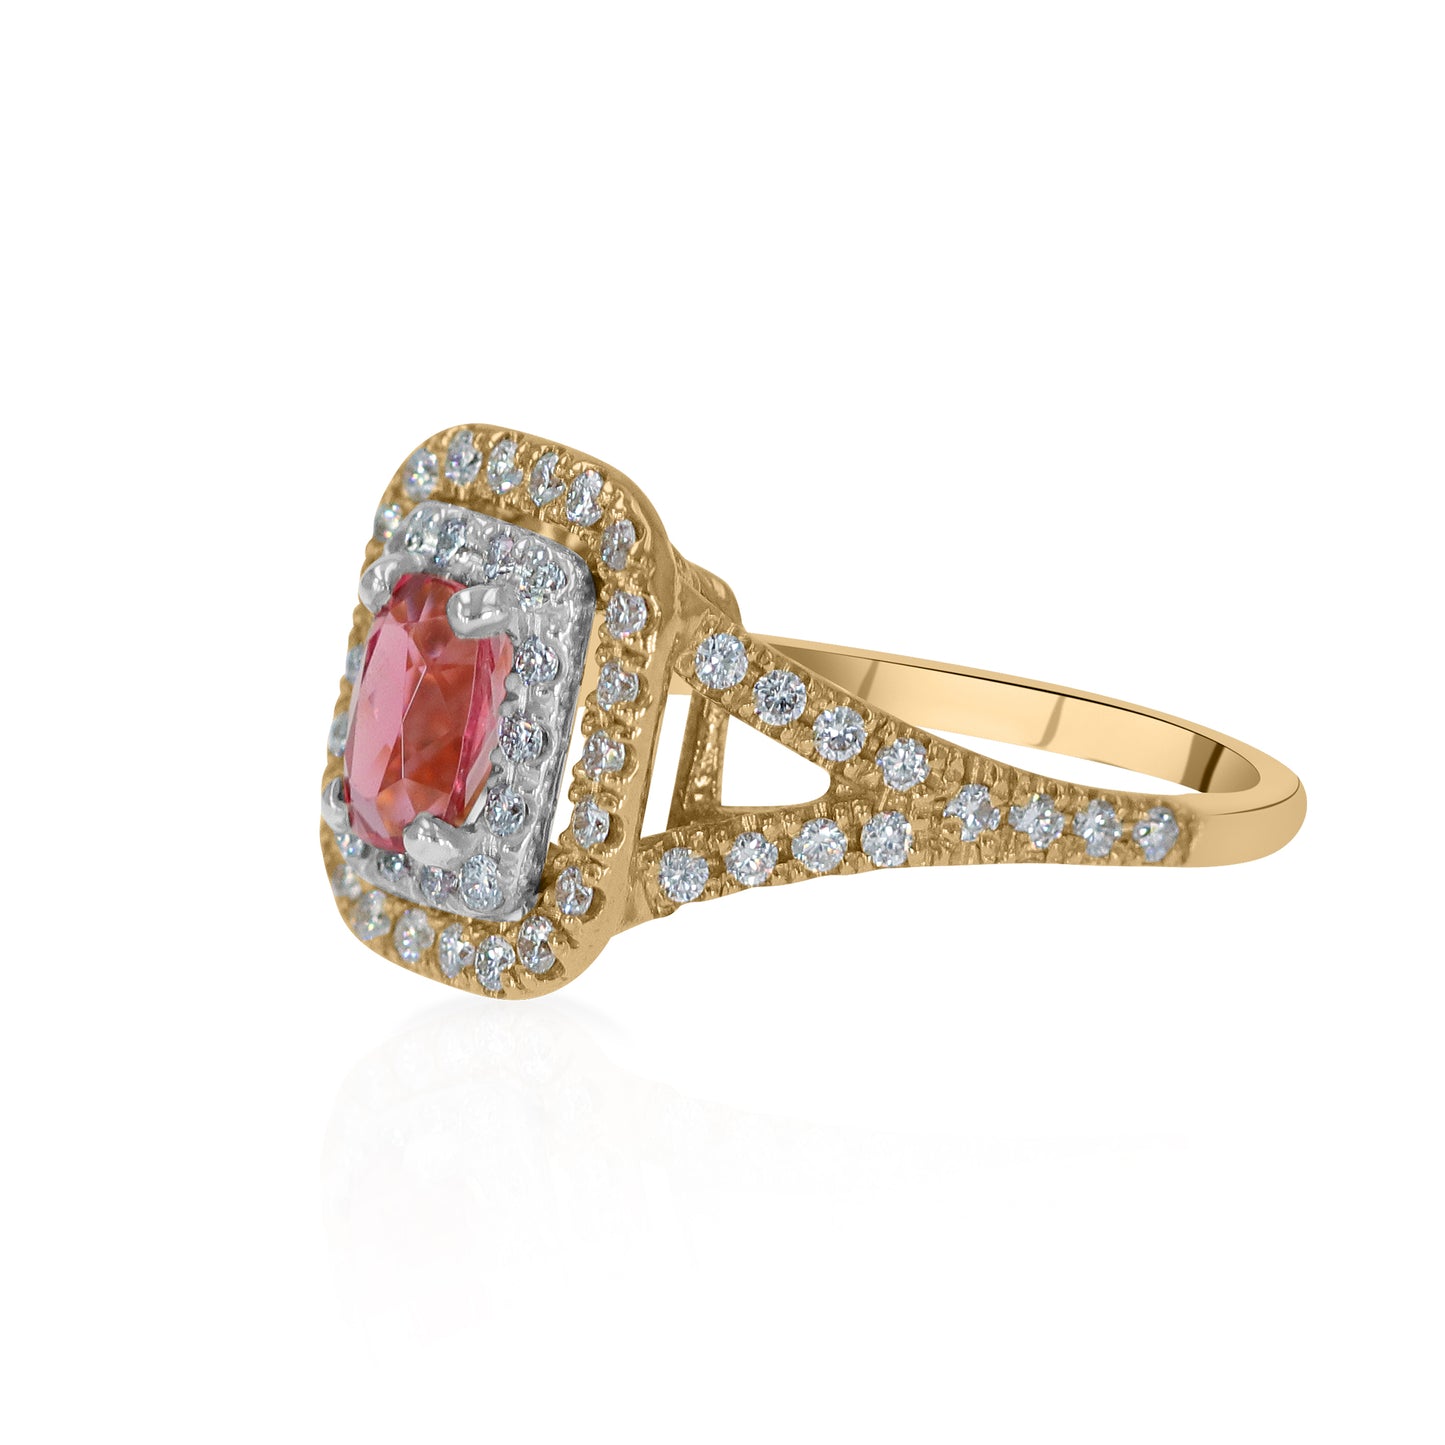 Natural Tanzanian Red Spinel and Diamond Ring